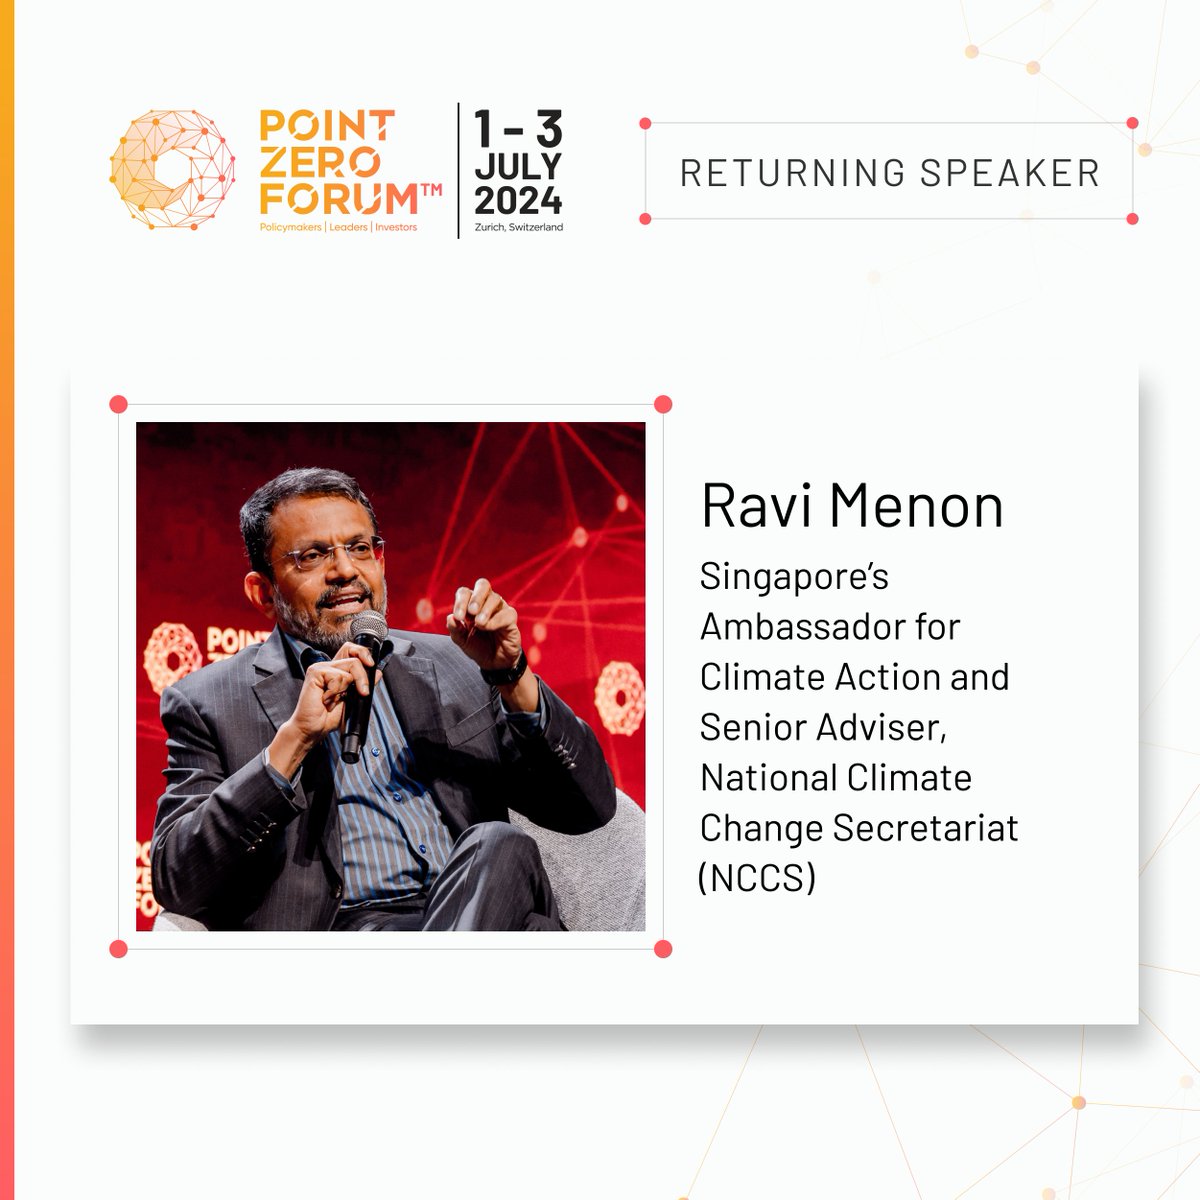 We're thrilled to have Ravi Menon, the Former Managing Director of @MAS_sg back at the Forum! Get ready for his session this year, where he will provide astute insights into the State of Global Finance and Technology today. Register now to join us: hubs.ly/Q02rsxrq0